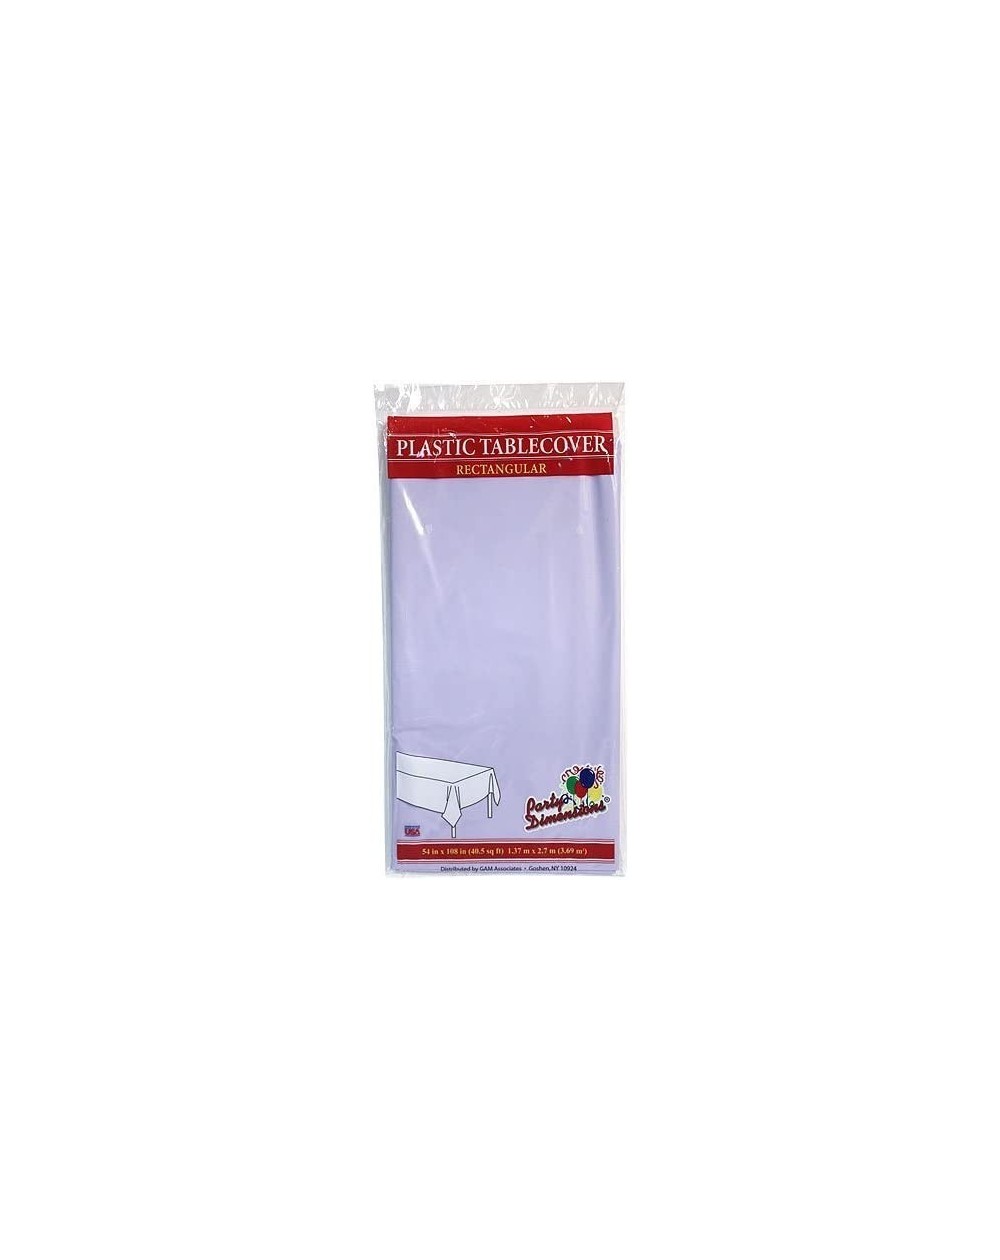 Tablecovers Plastic Party Tablecloths - Disposable- Rectangular Tablecovers - 4 Pack - Lavender - C912MY2RLLS $11.84